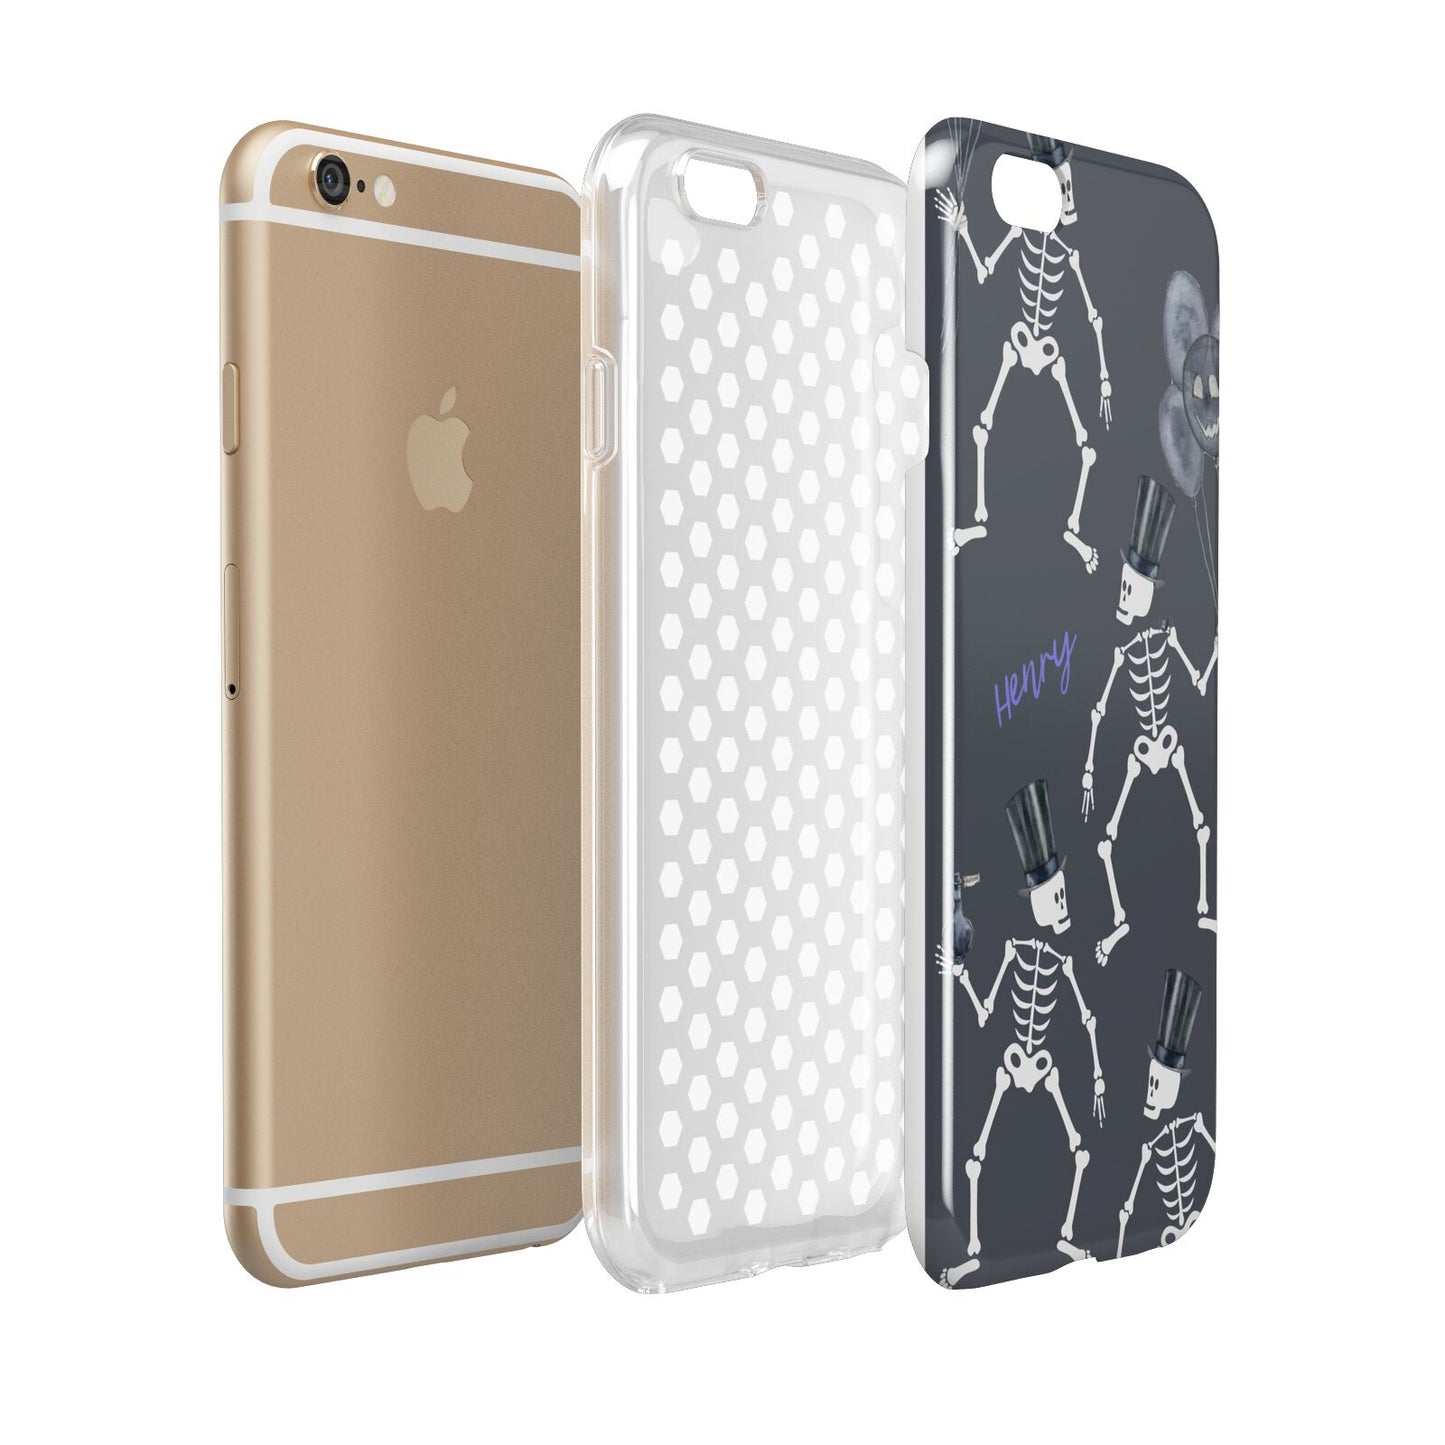 Halloween Skeleton Apple iPhone 6 3D Tough Case Expanded view